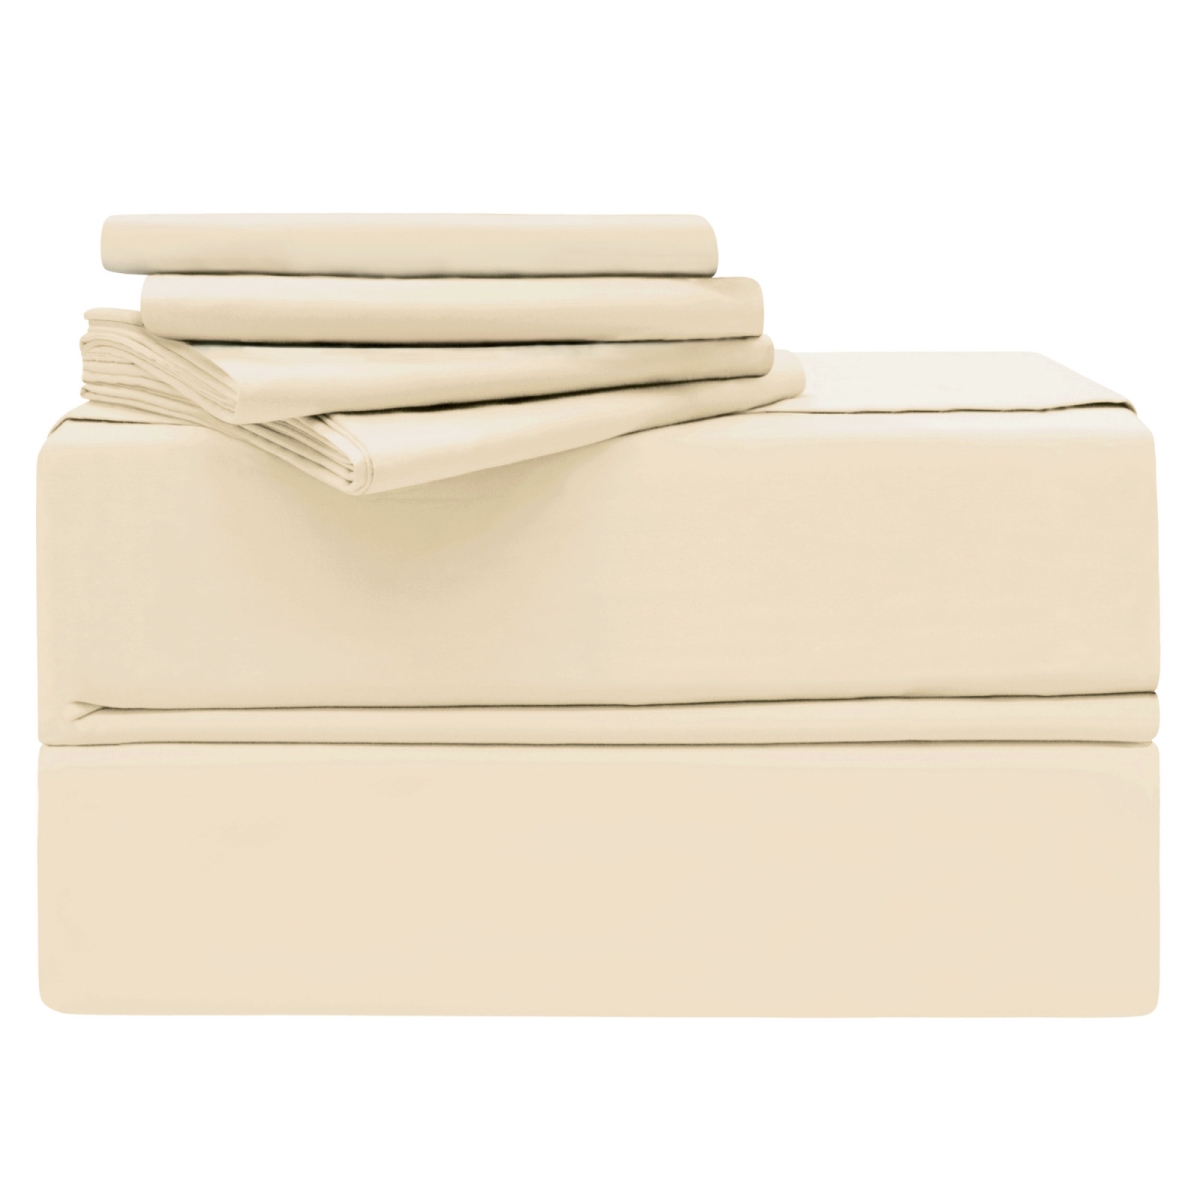 Yms008195 Luxury 620 Thread Count 100 Percent Cotton Sheet Set, Ivory - Queen - 6 Piece